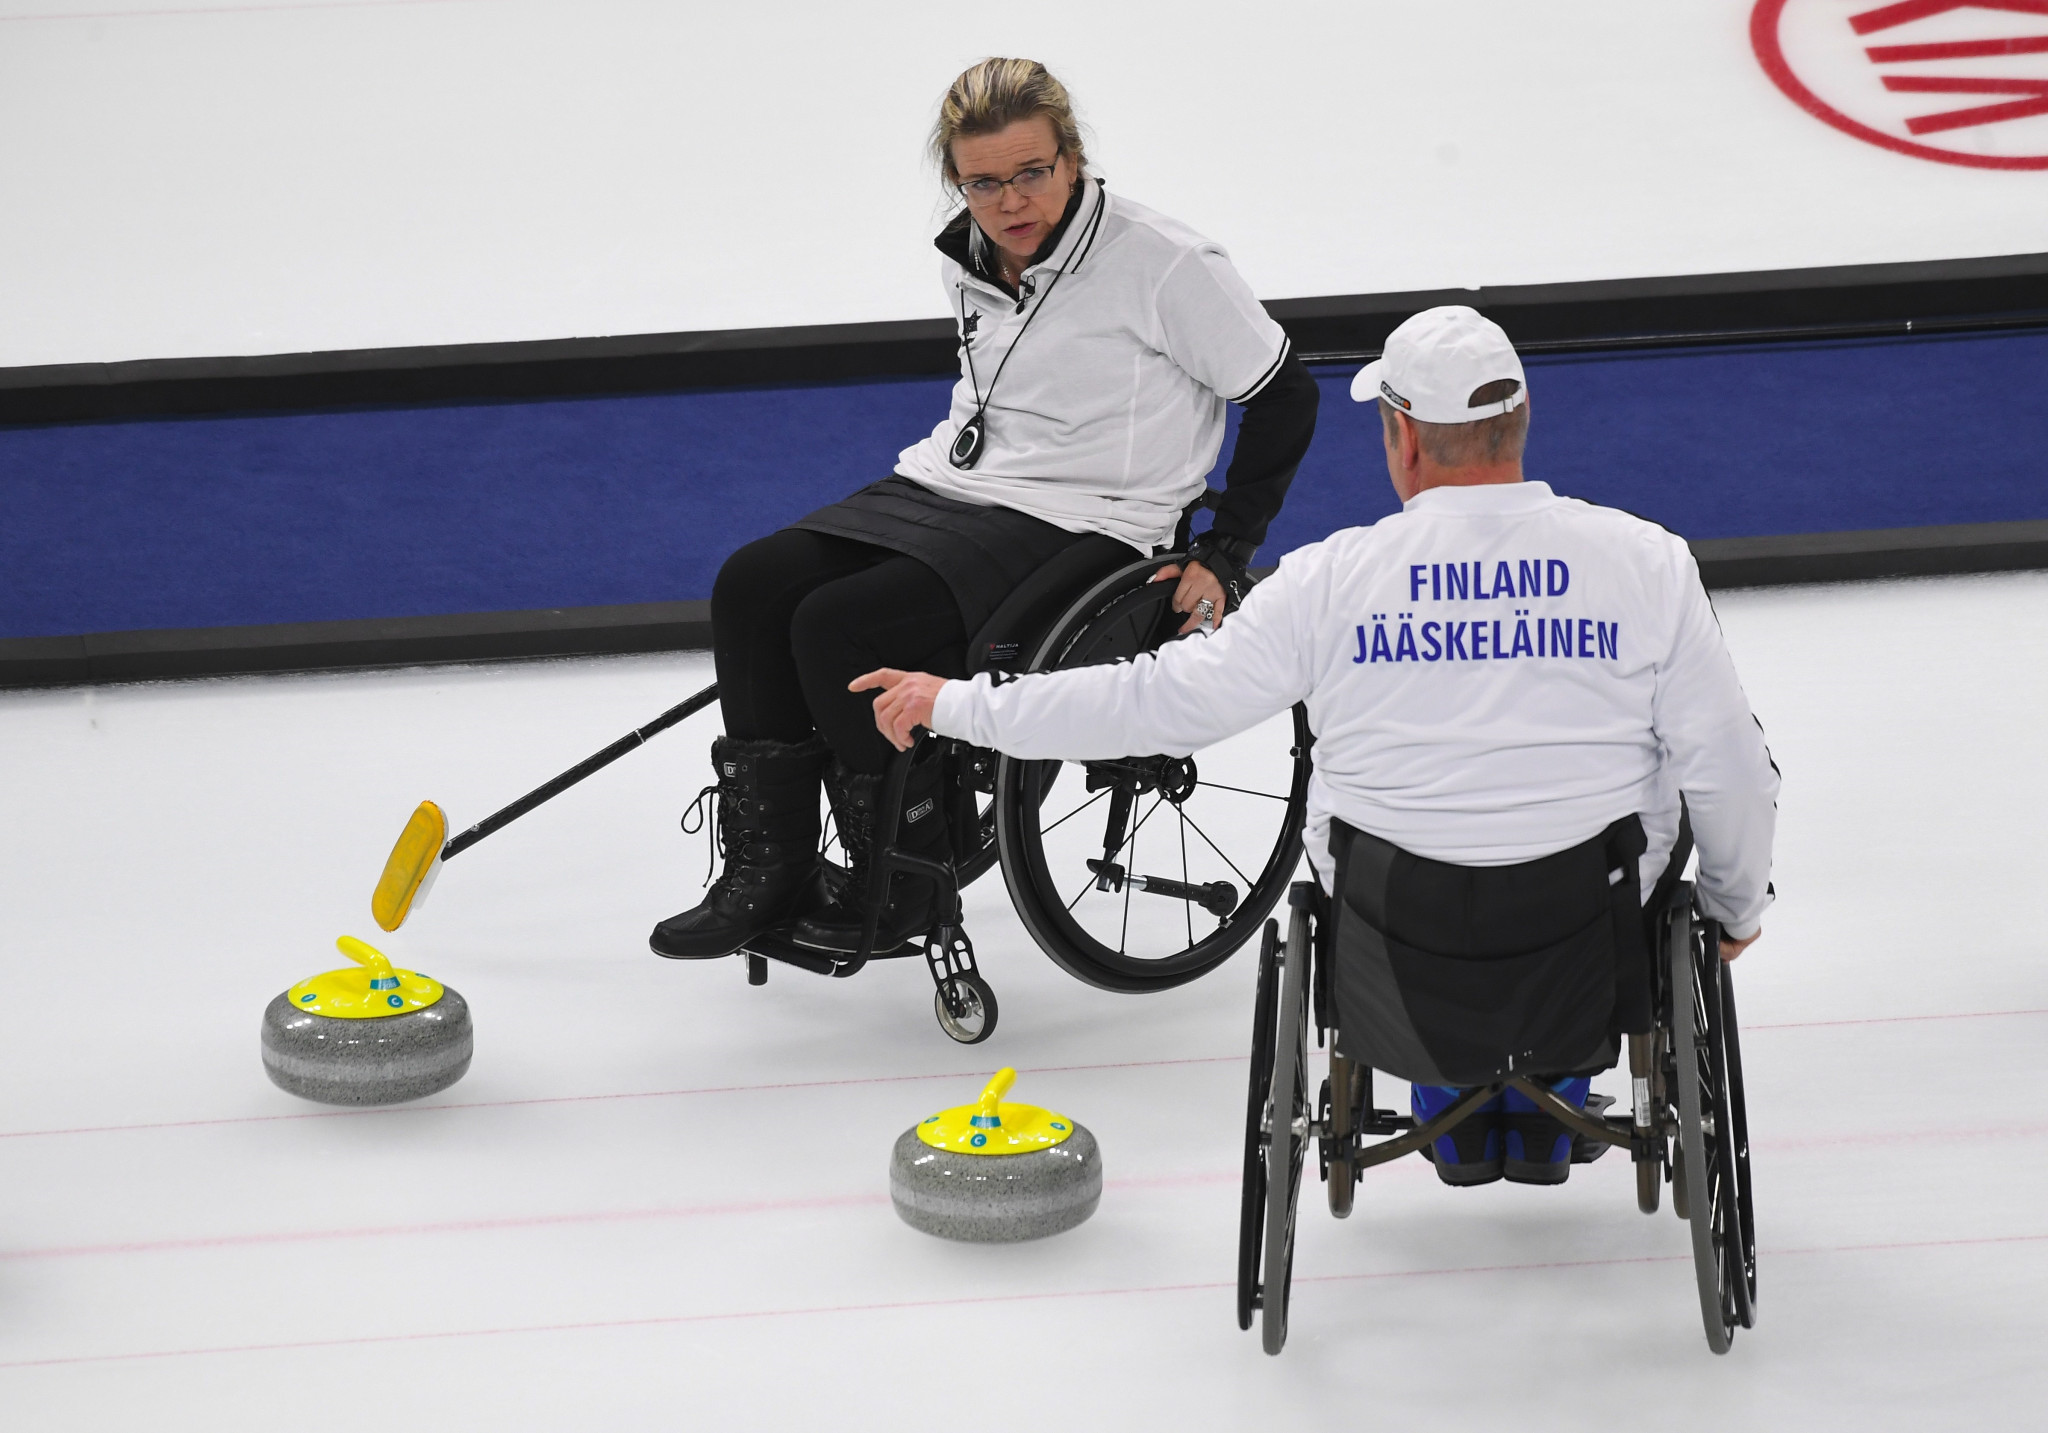 First World Wheelchair Mixed Doubles Curling Championship to be held in Finland